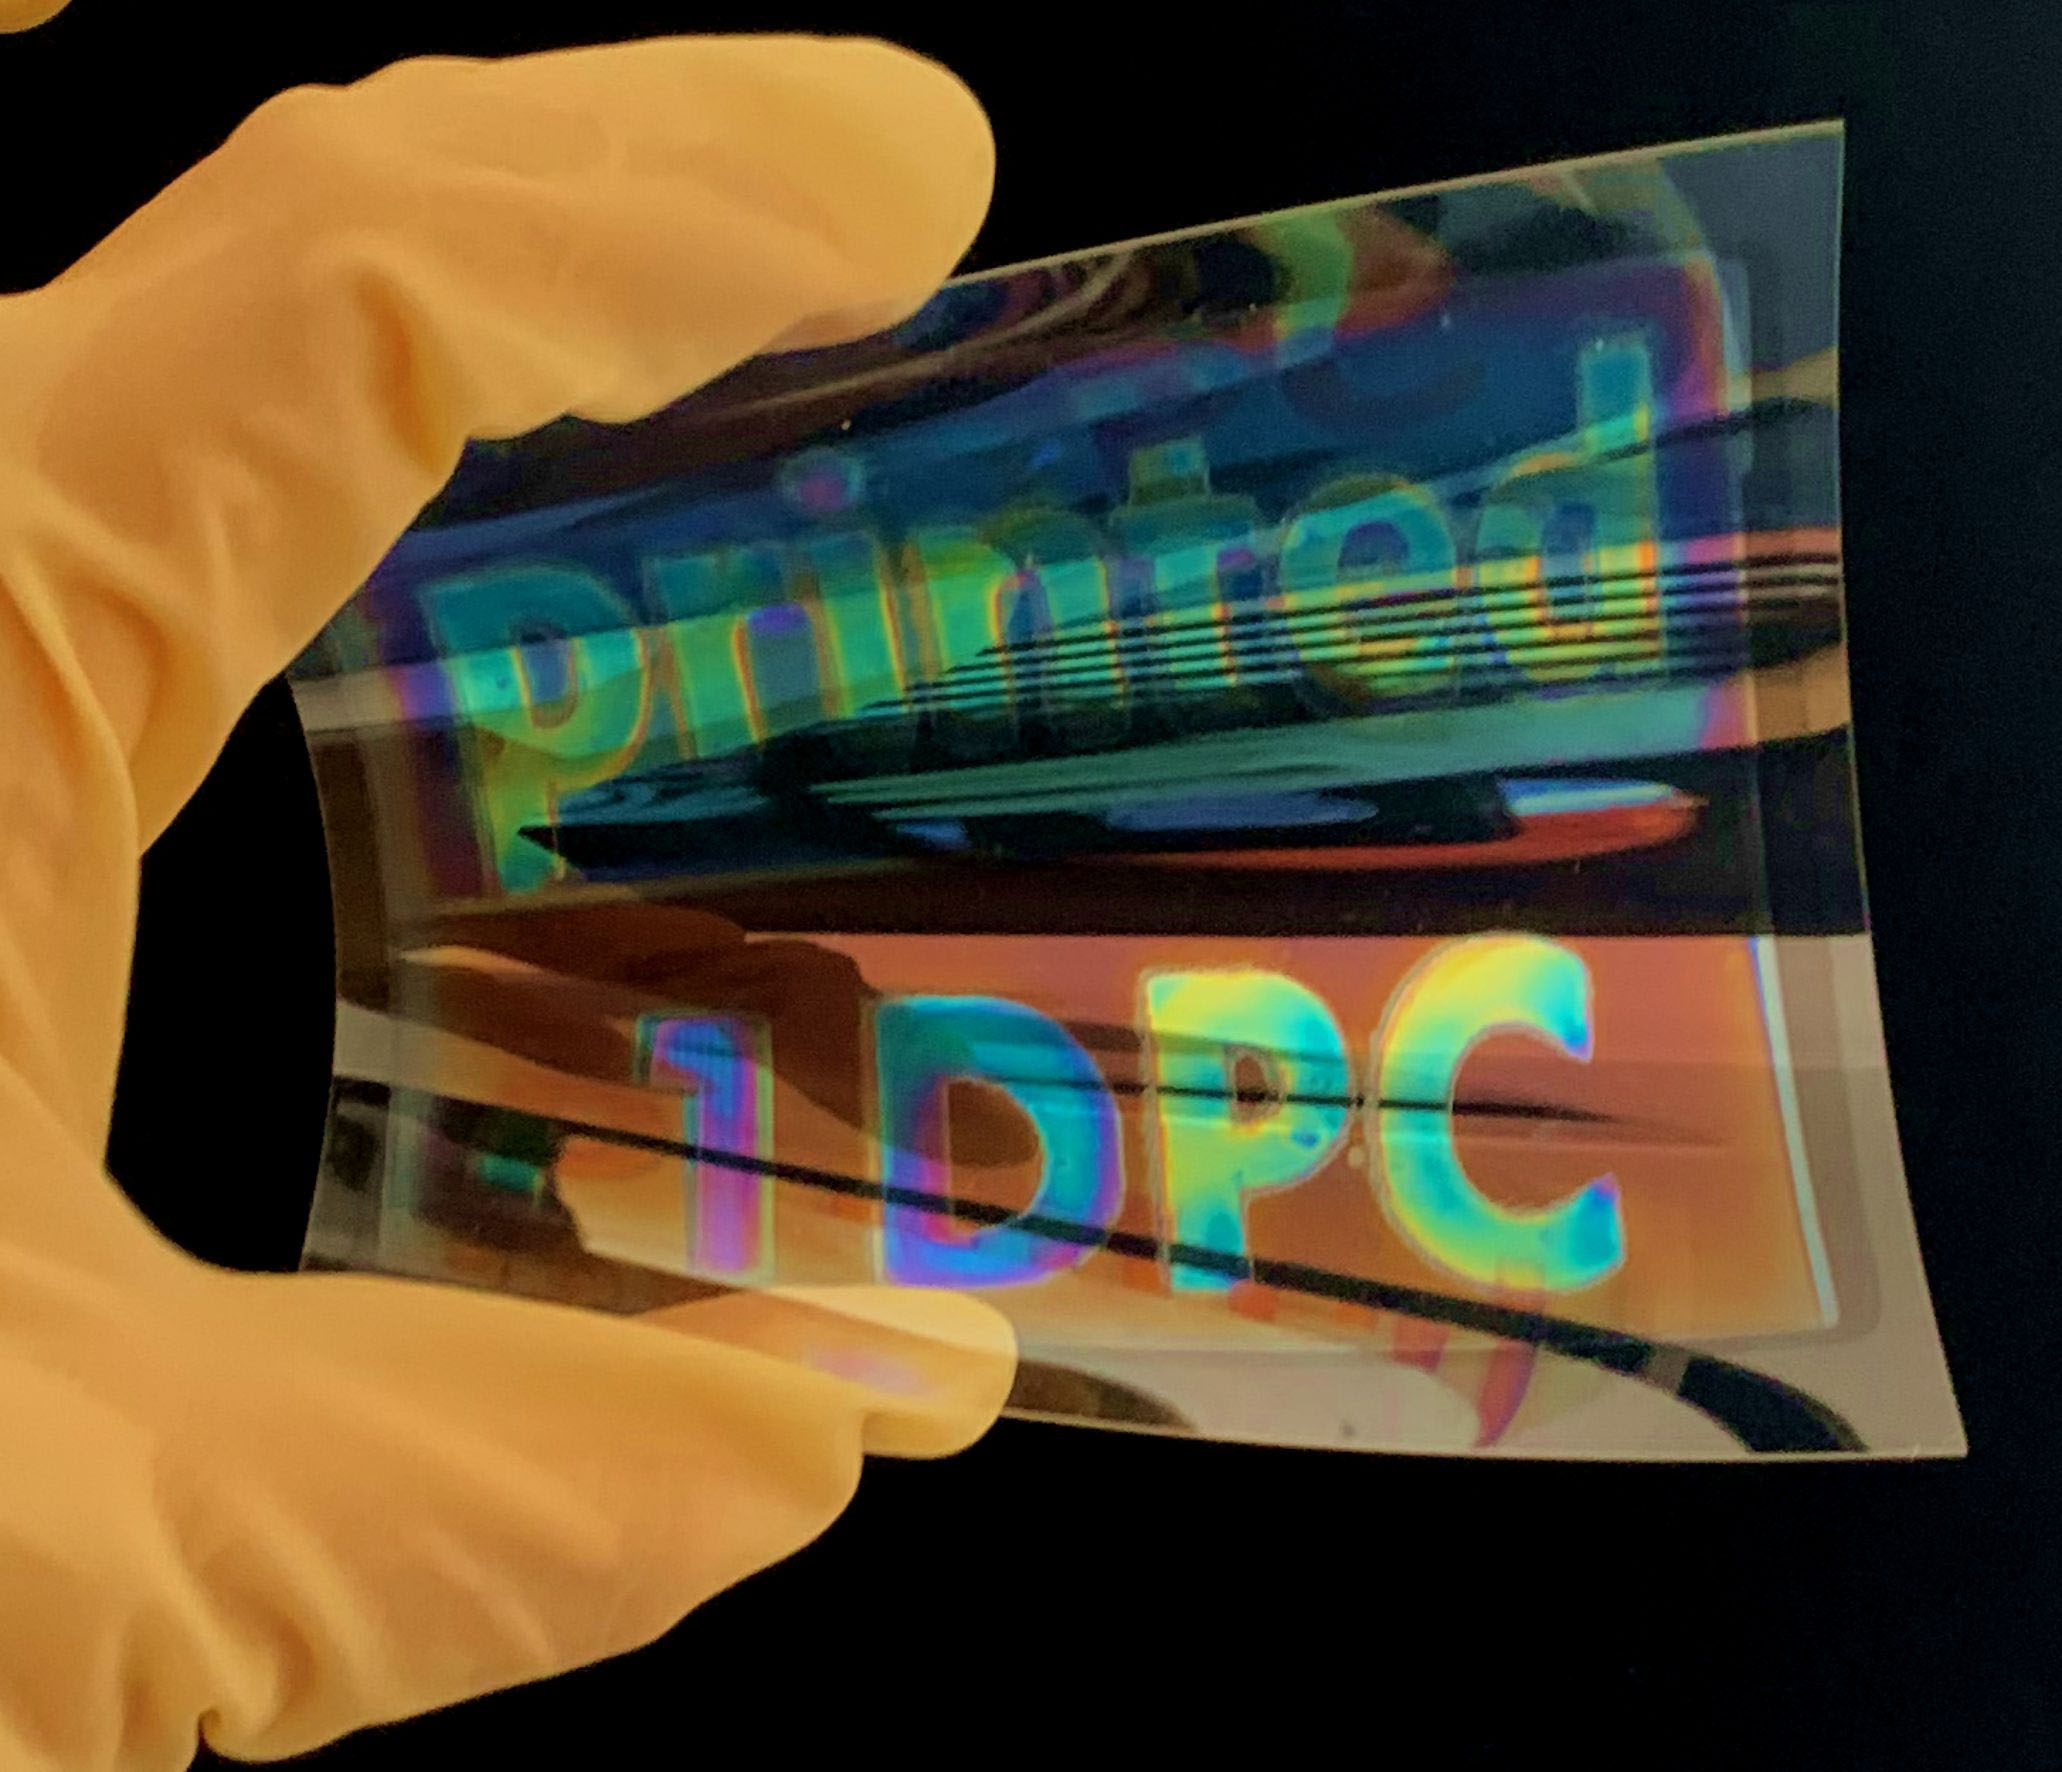 Colored mirror layer printed onto a foil